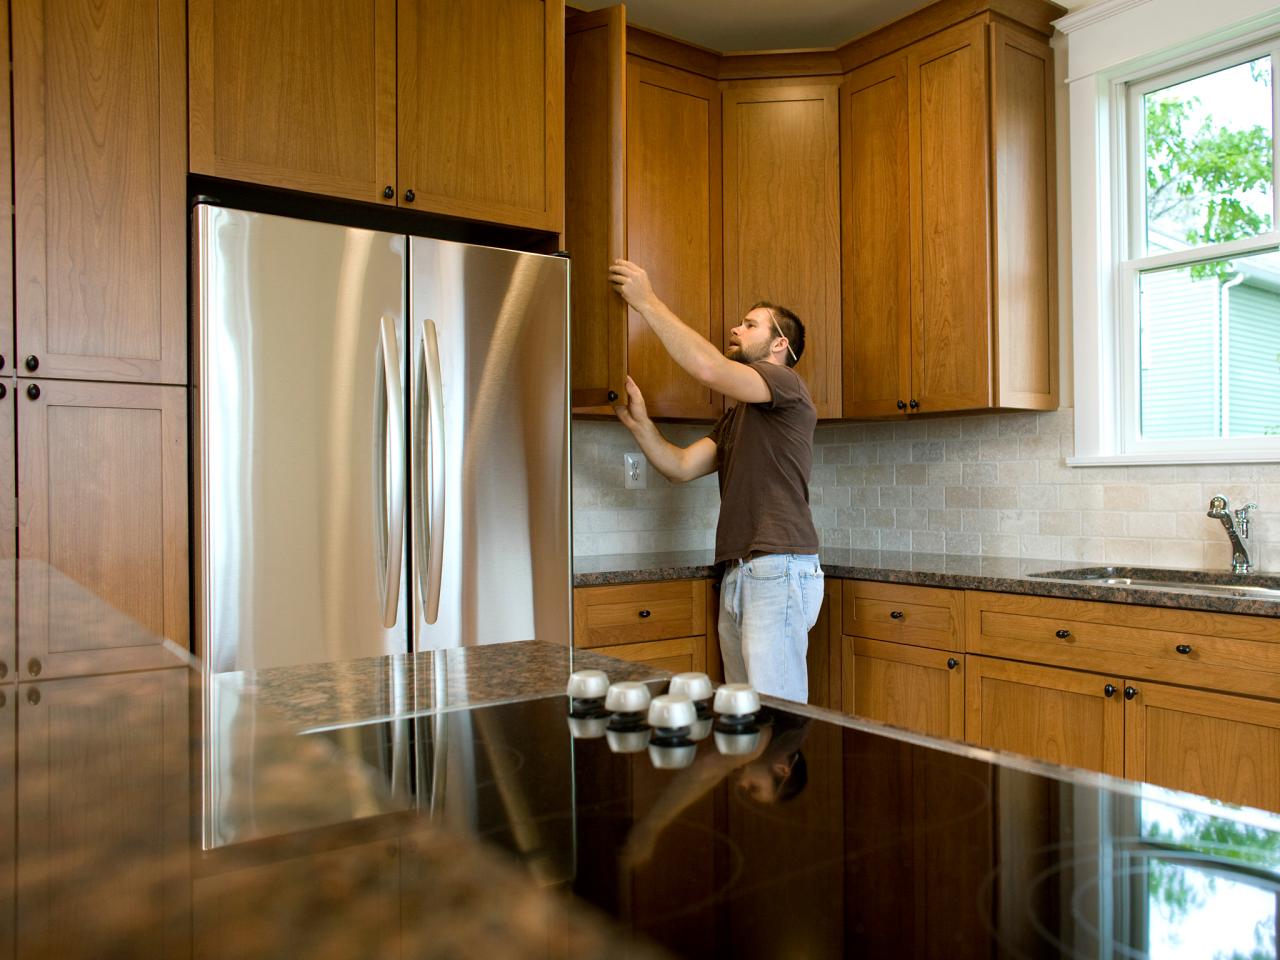 How To Install Kitchen Cabinets, How To Remove And Replace Kitchen Cabinets